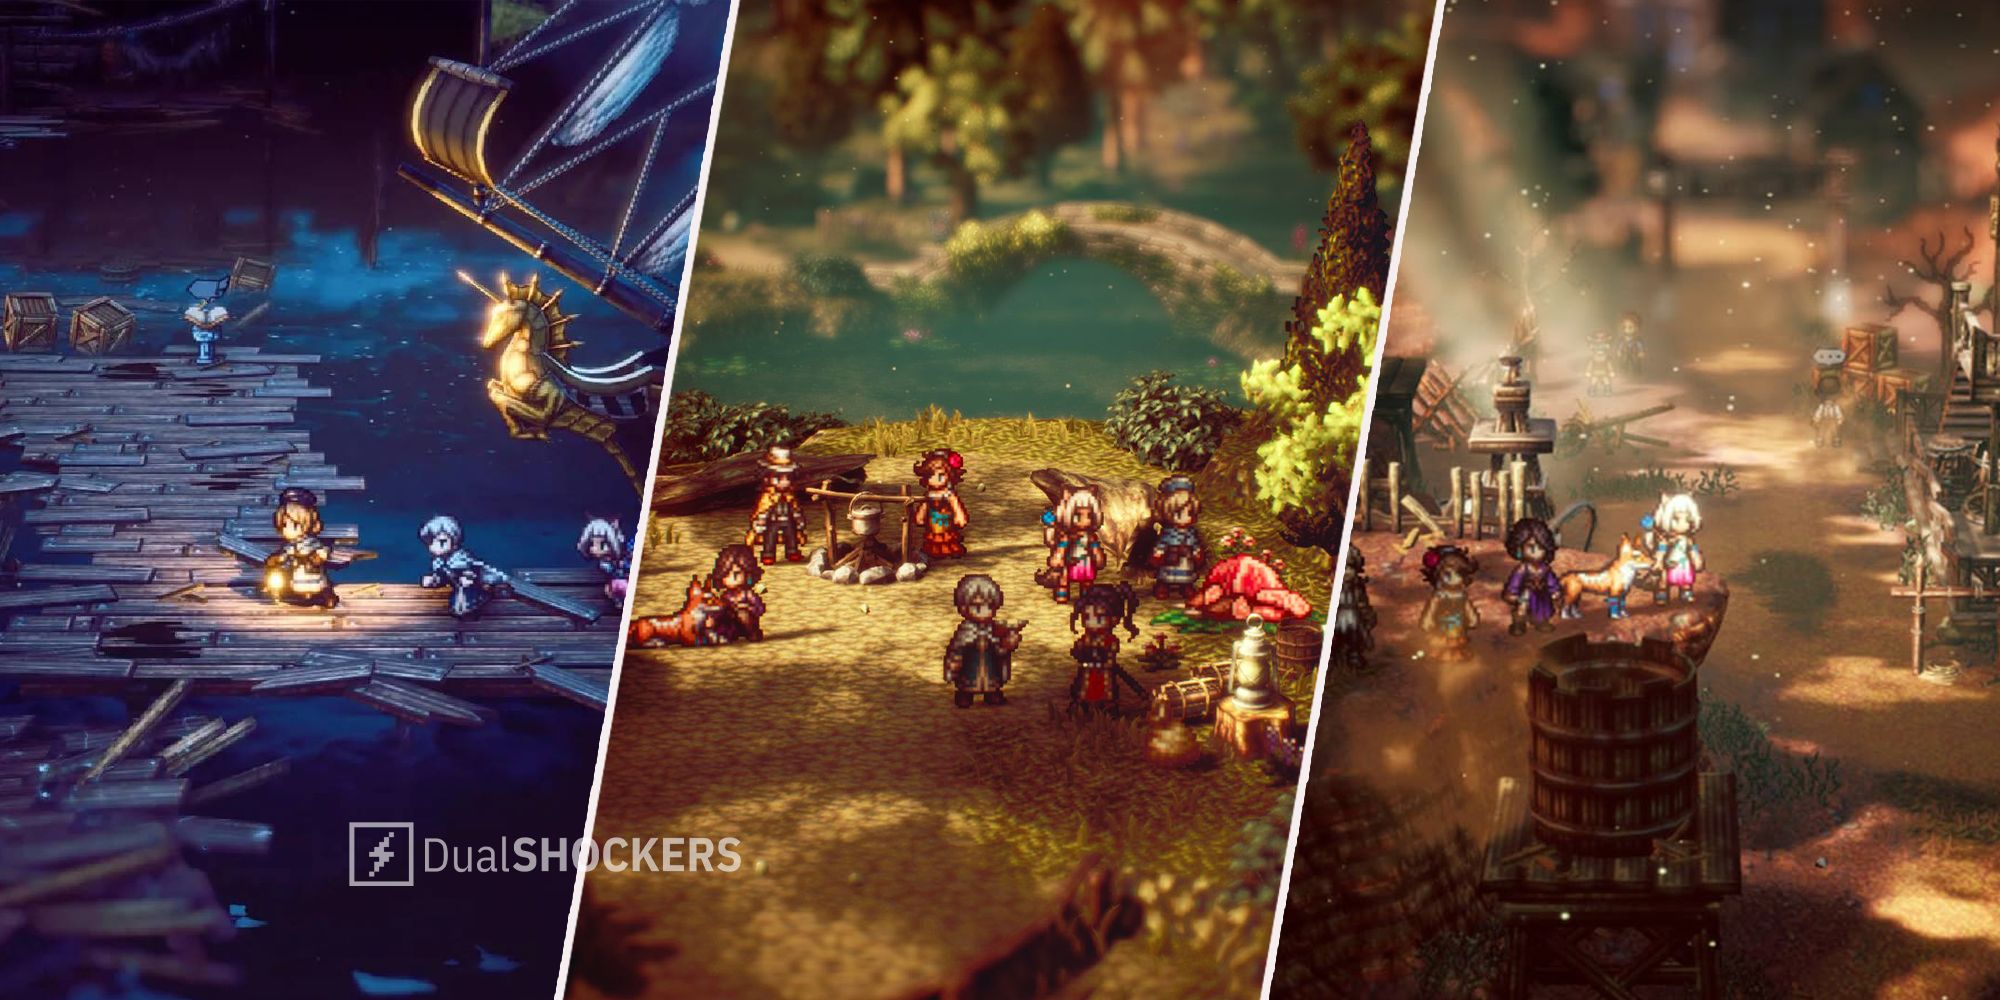 Octopath Traveler Beginner's Guide - The Complete Guide for a